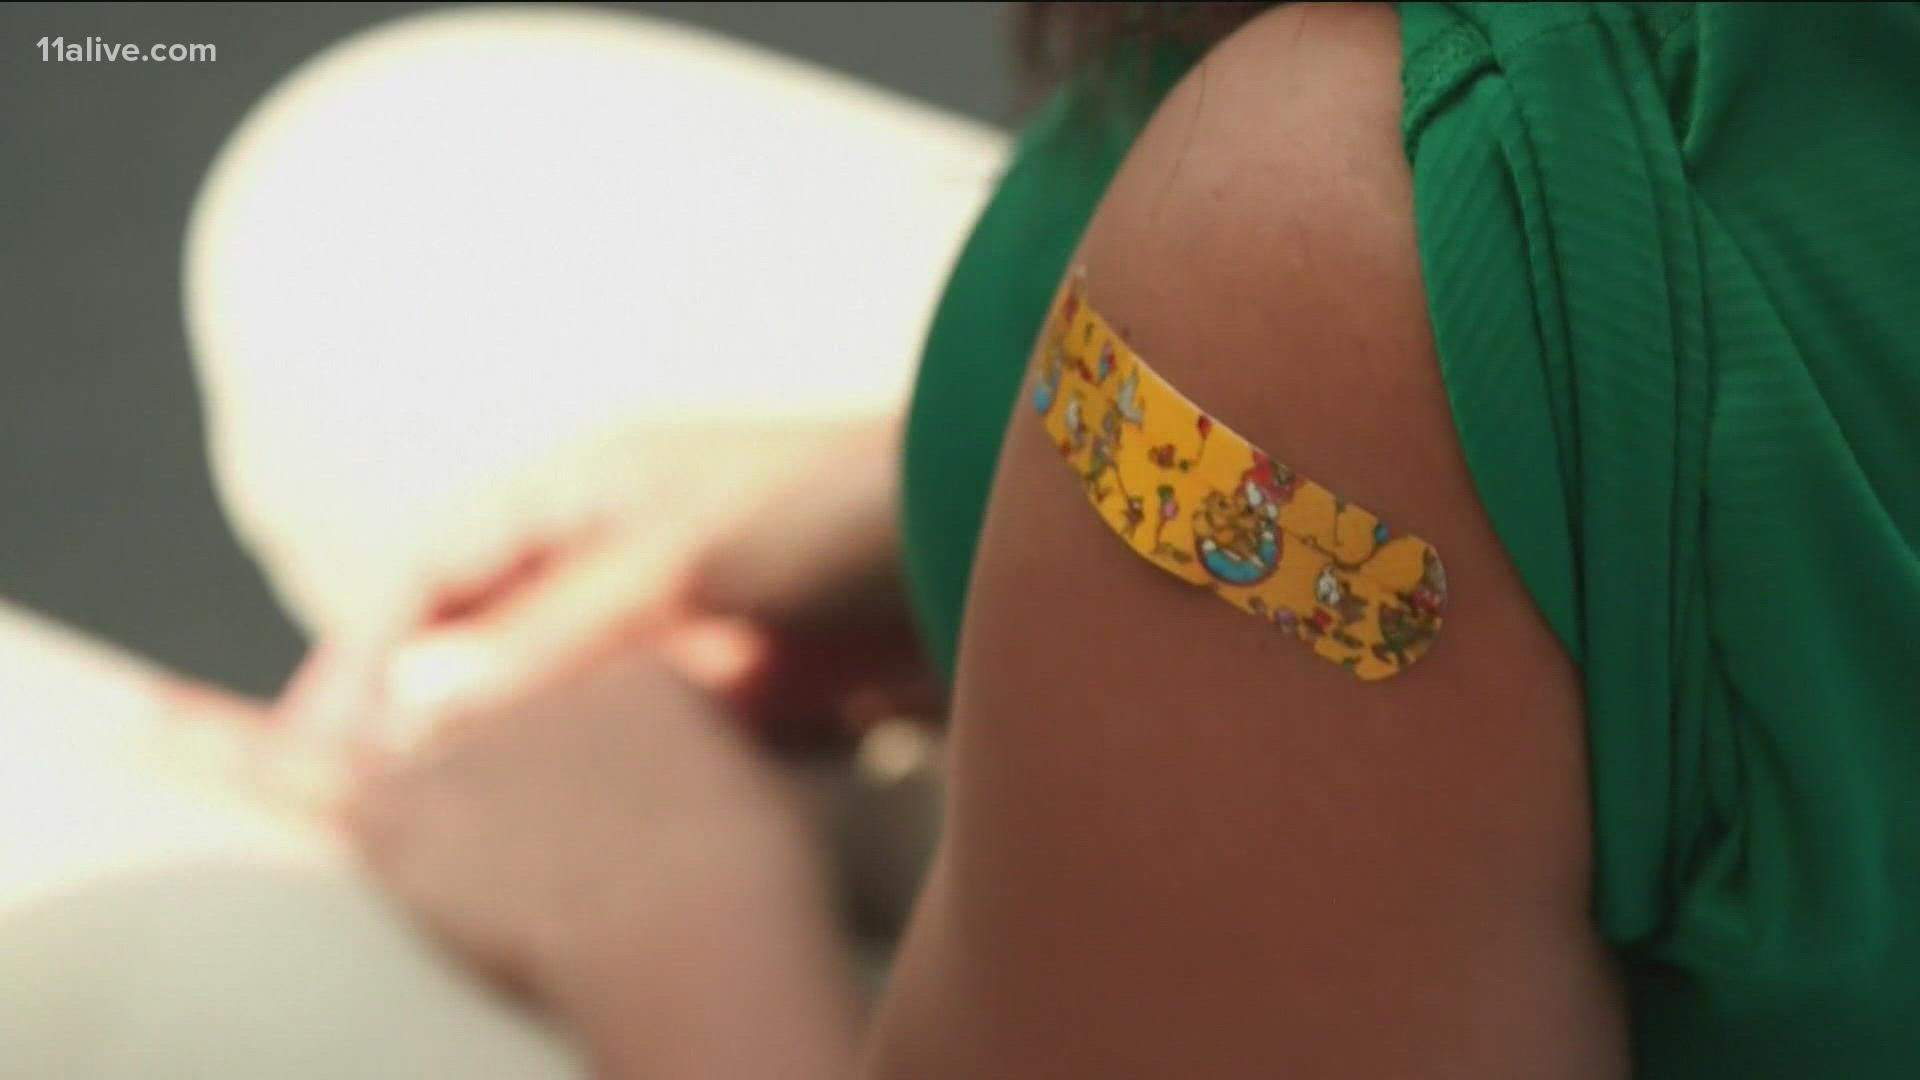 Doctors across Georgia are reporting an uptick in flu visits among kids. They said they're finding more severe cases in children under the age of 5.